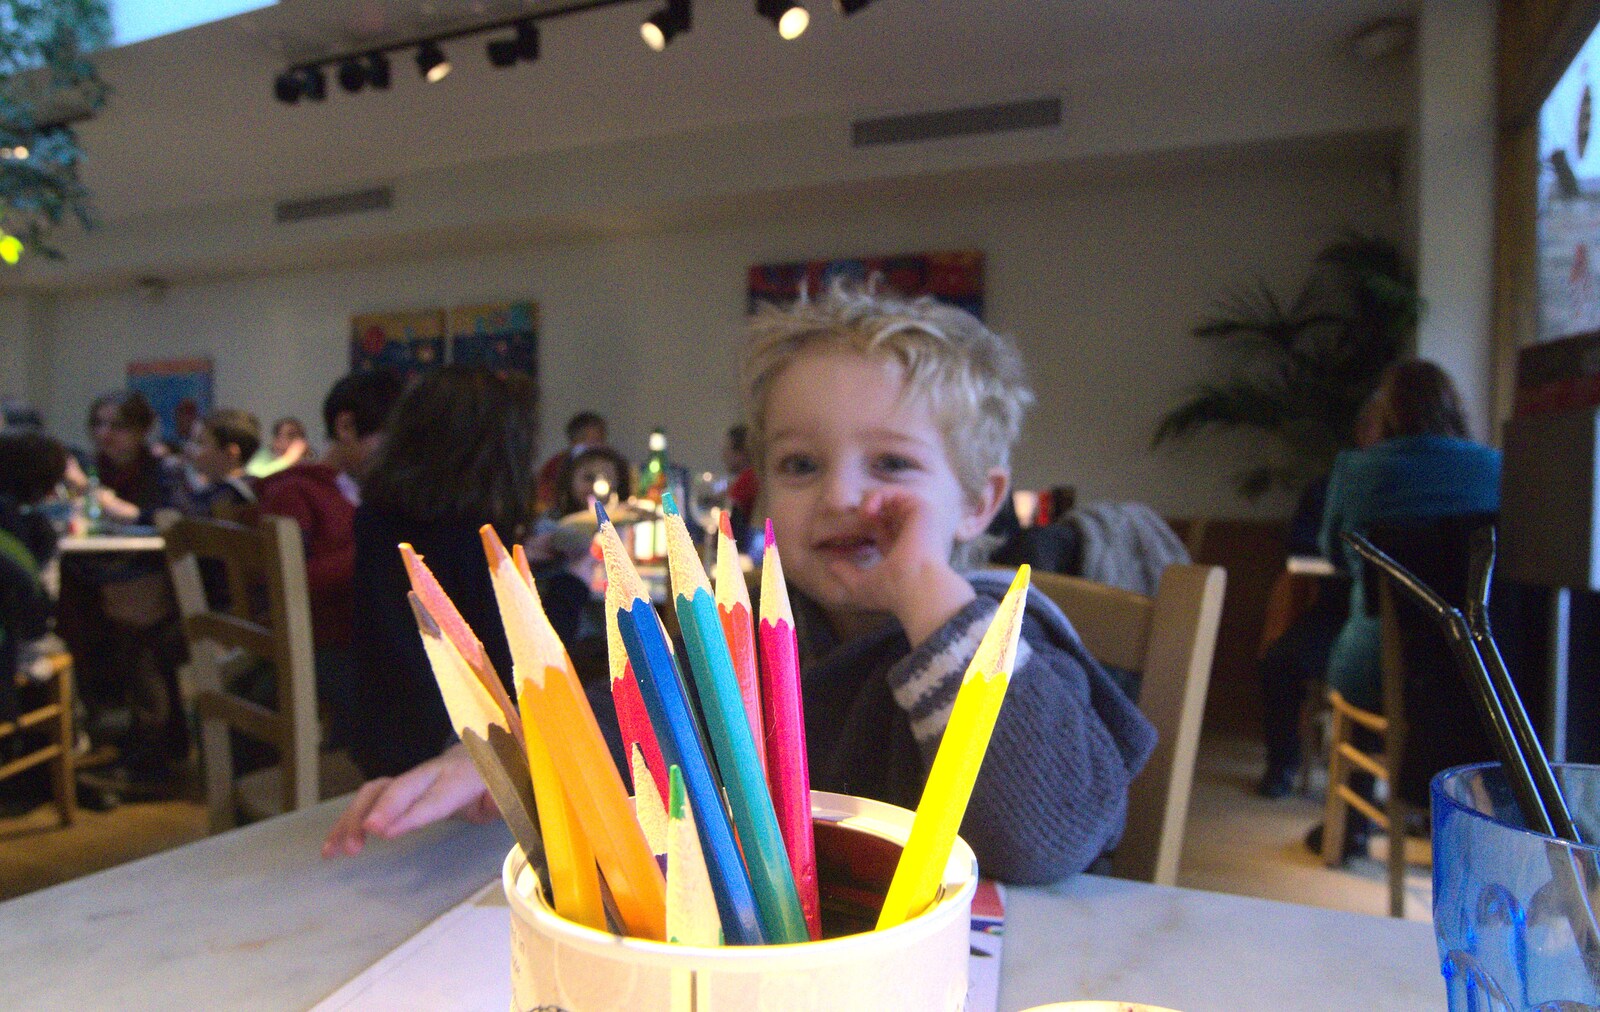 A collection of coloured pencils from Pizza Express with Grandad, Bury St. Edmunds, Suffolk - 29th December 2011